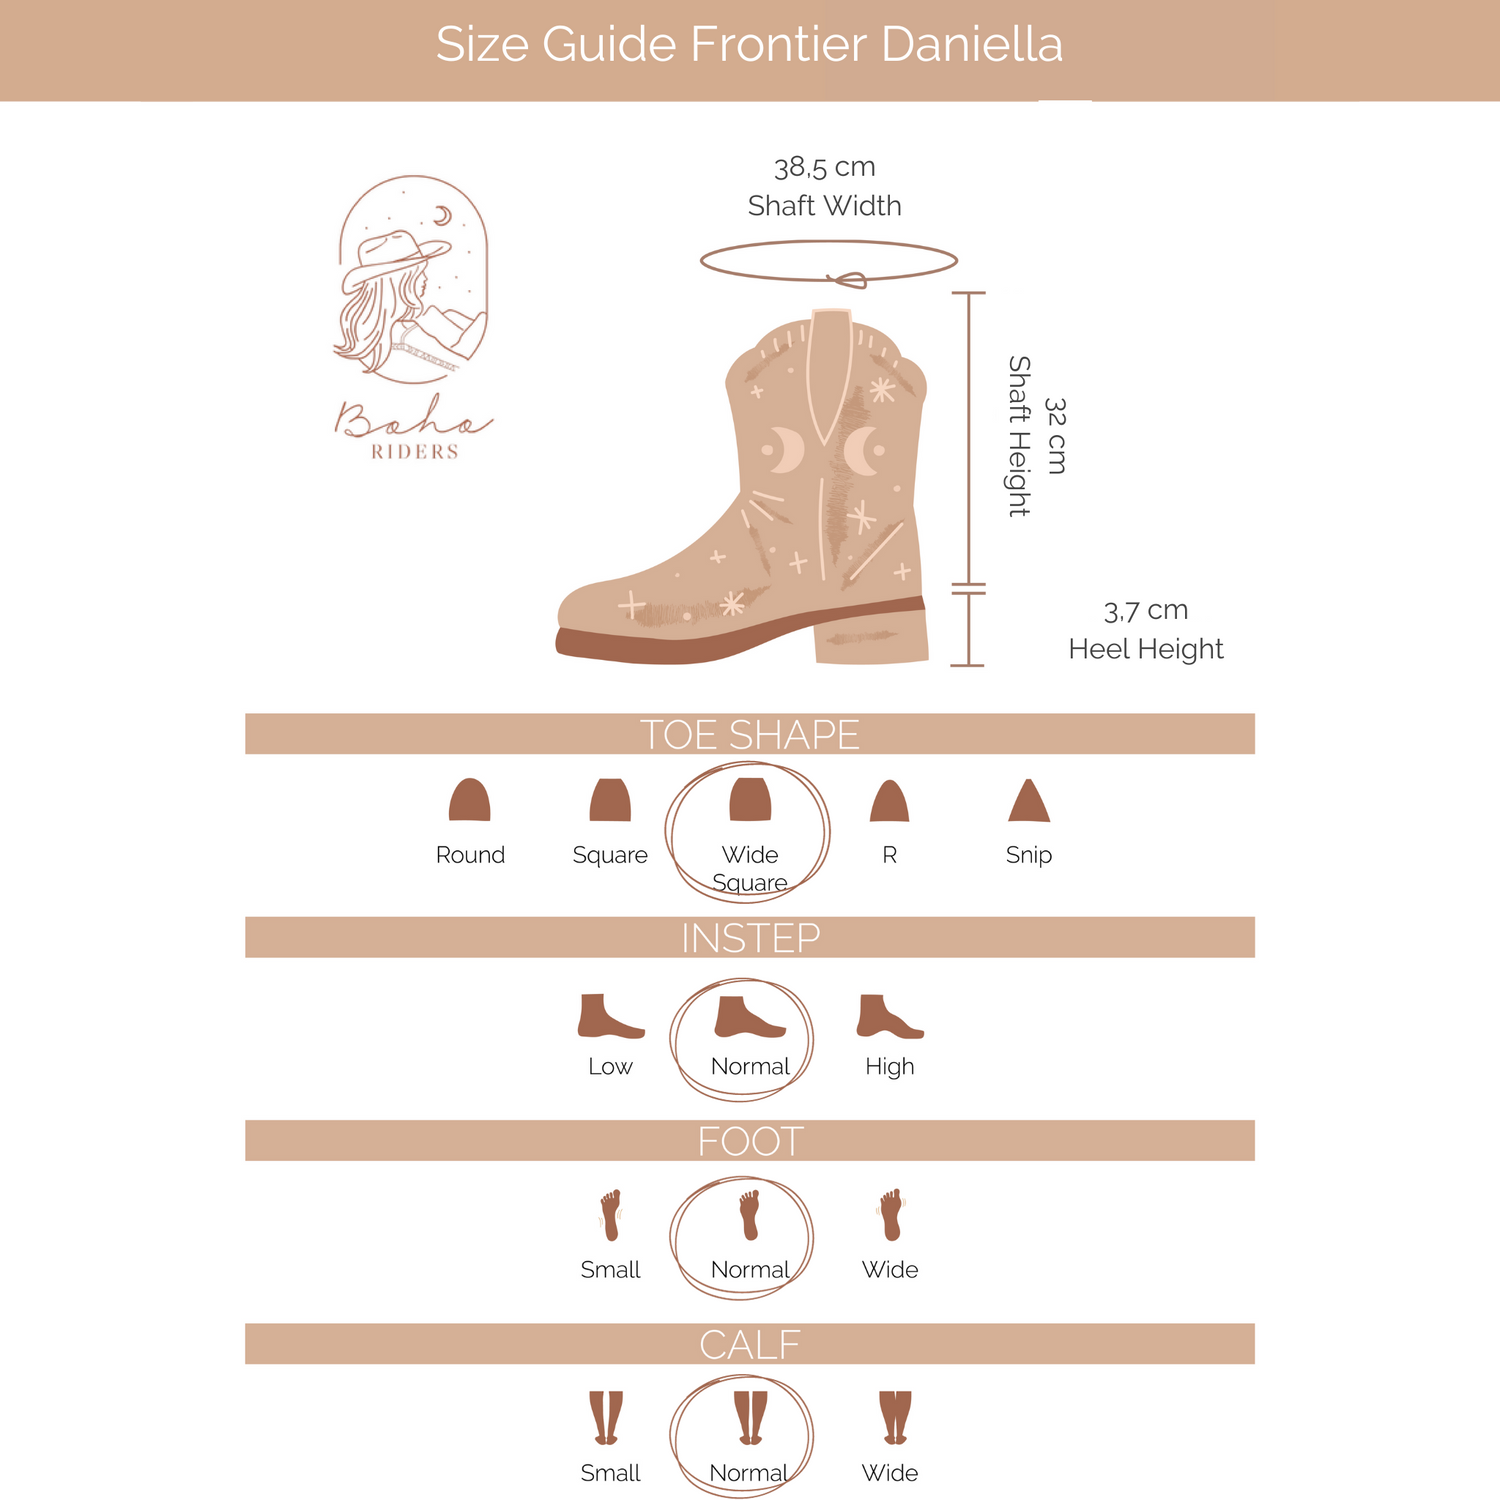 What you want to know about the fit ofAriat Frontier Daniella Western Boot - Riding boots - 12" shaft height - Brazen Tan / Sanded White